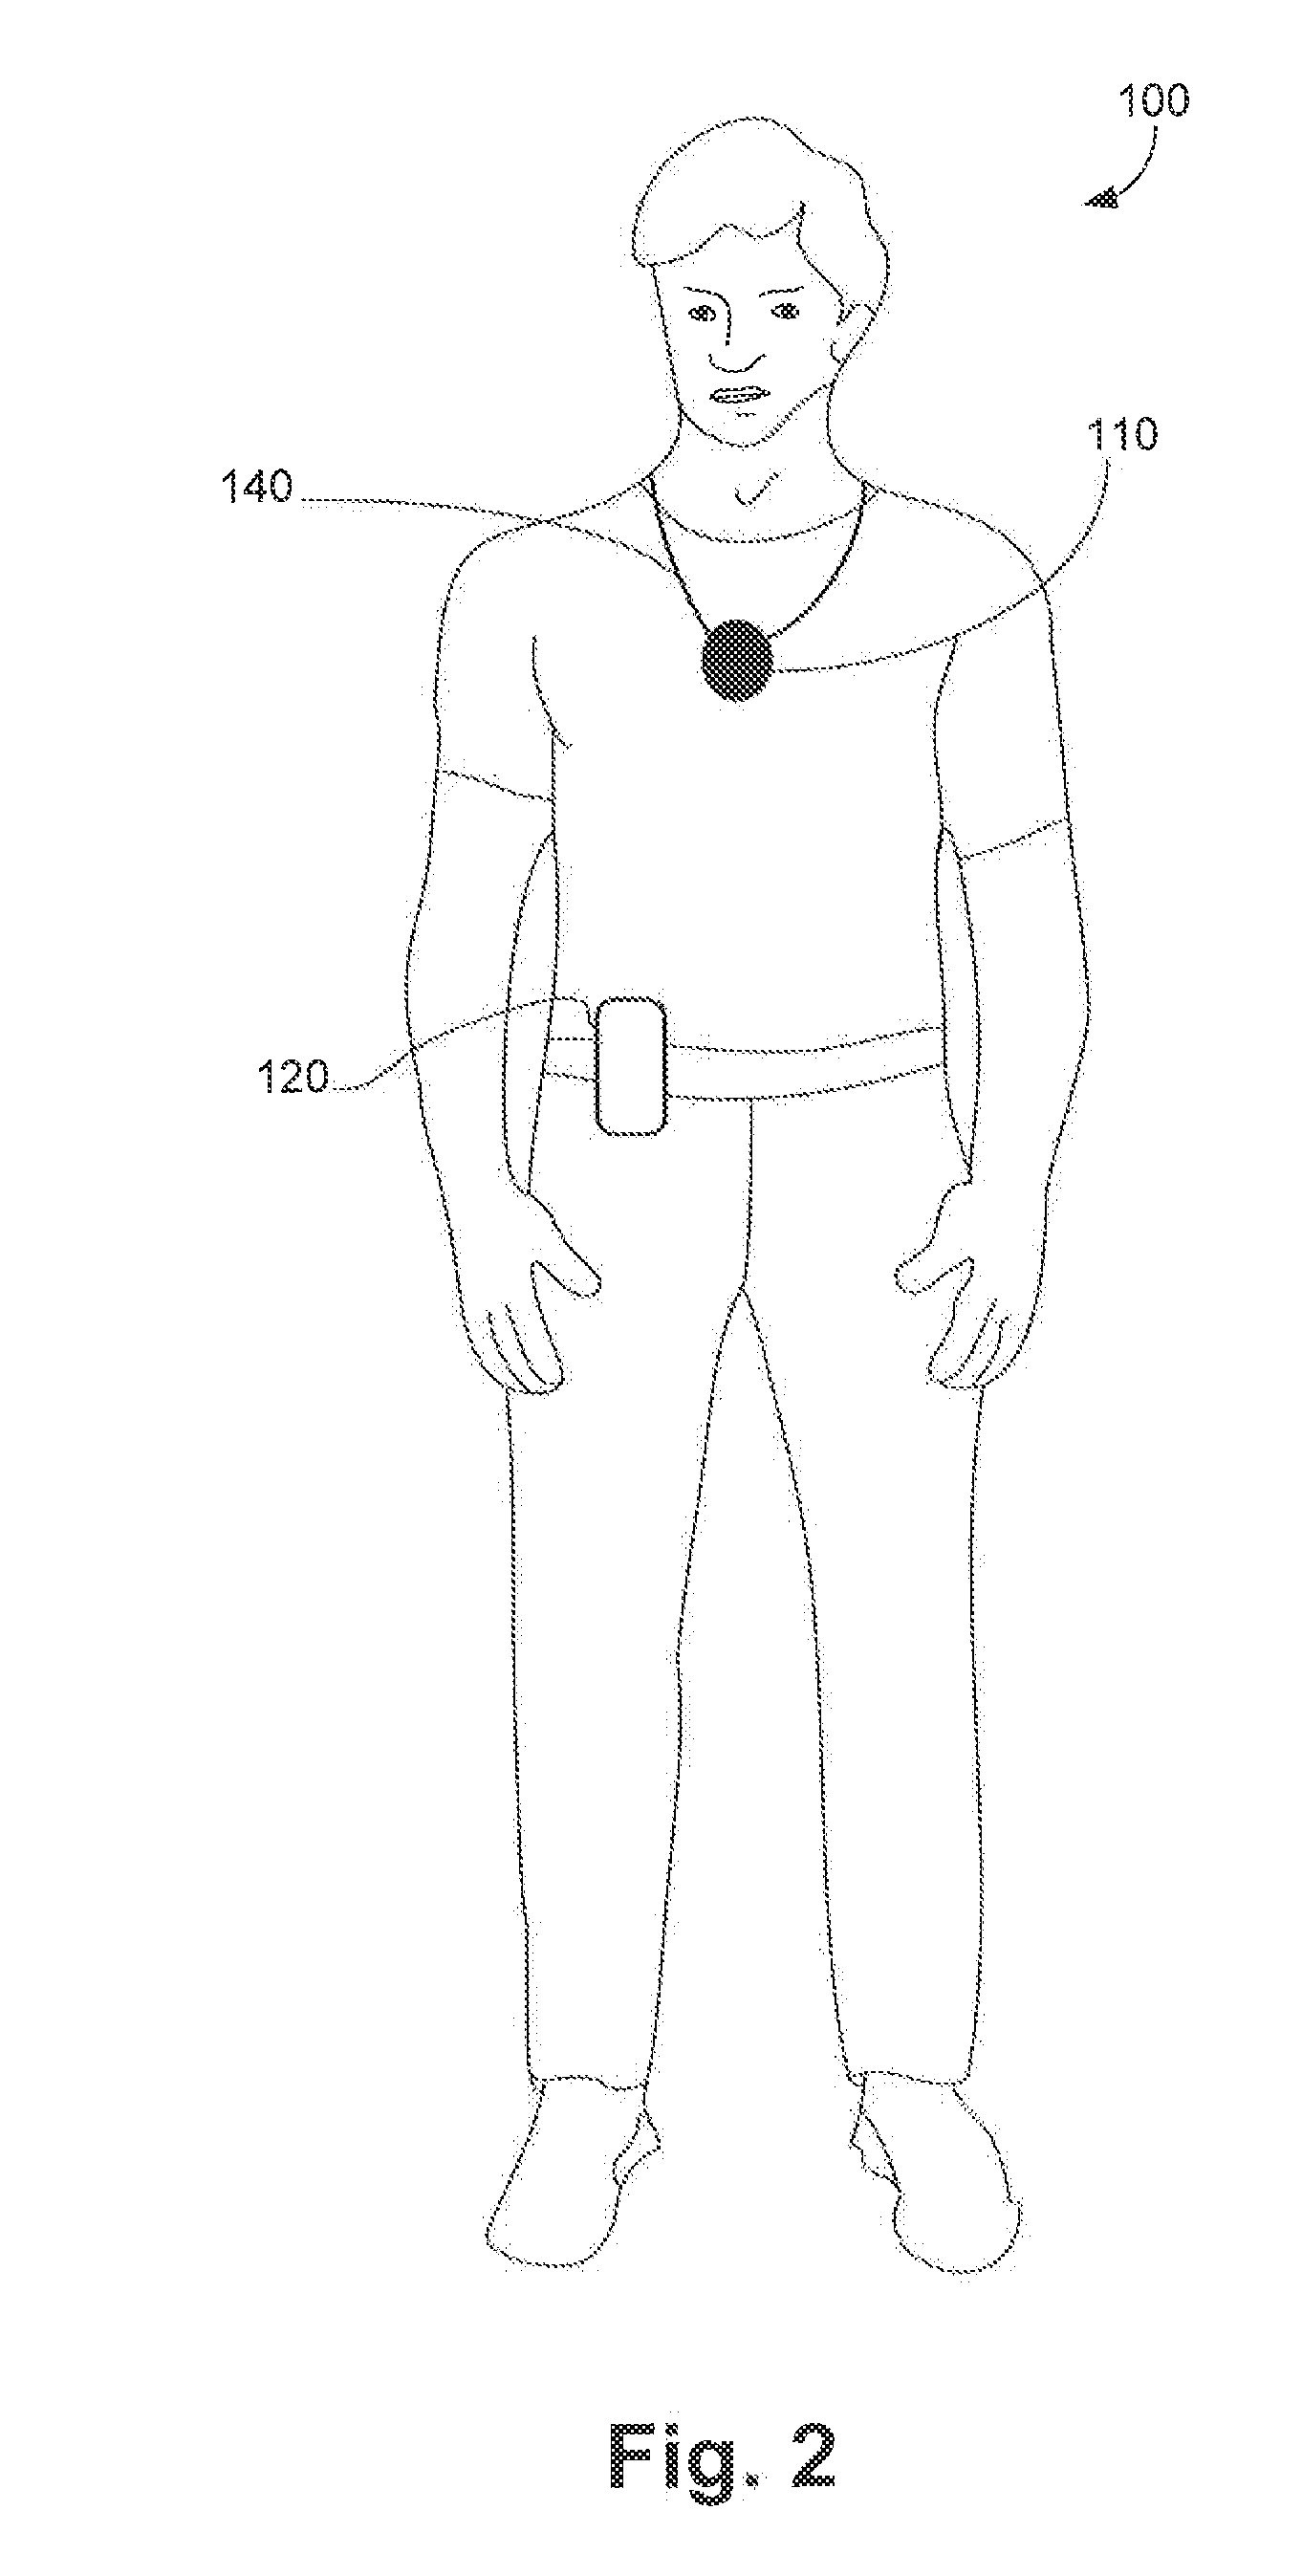 Wearable apparatus and methods for processing image data